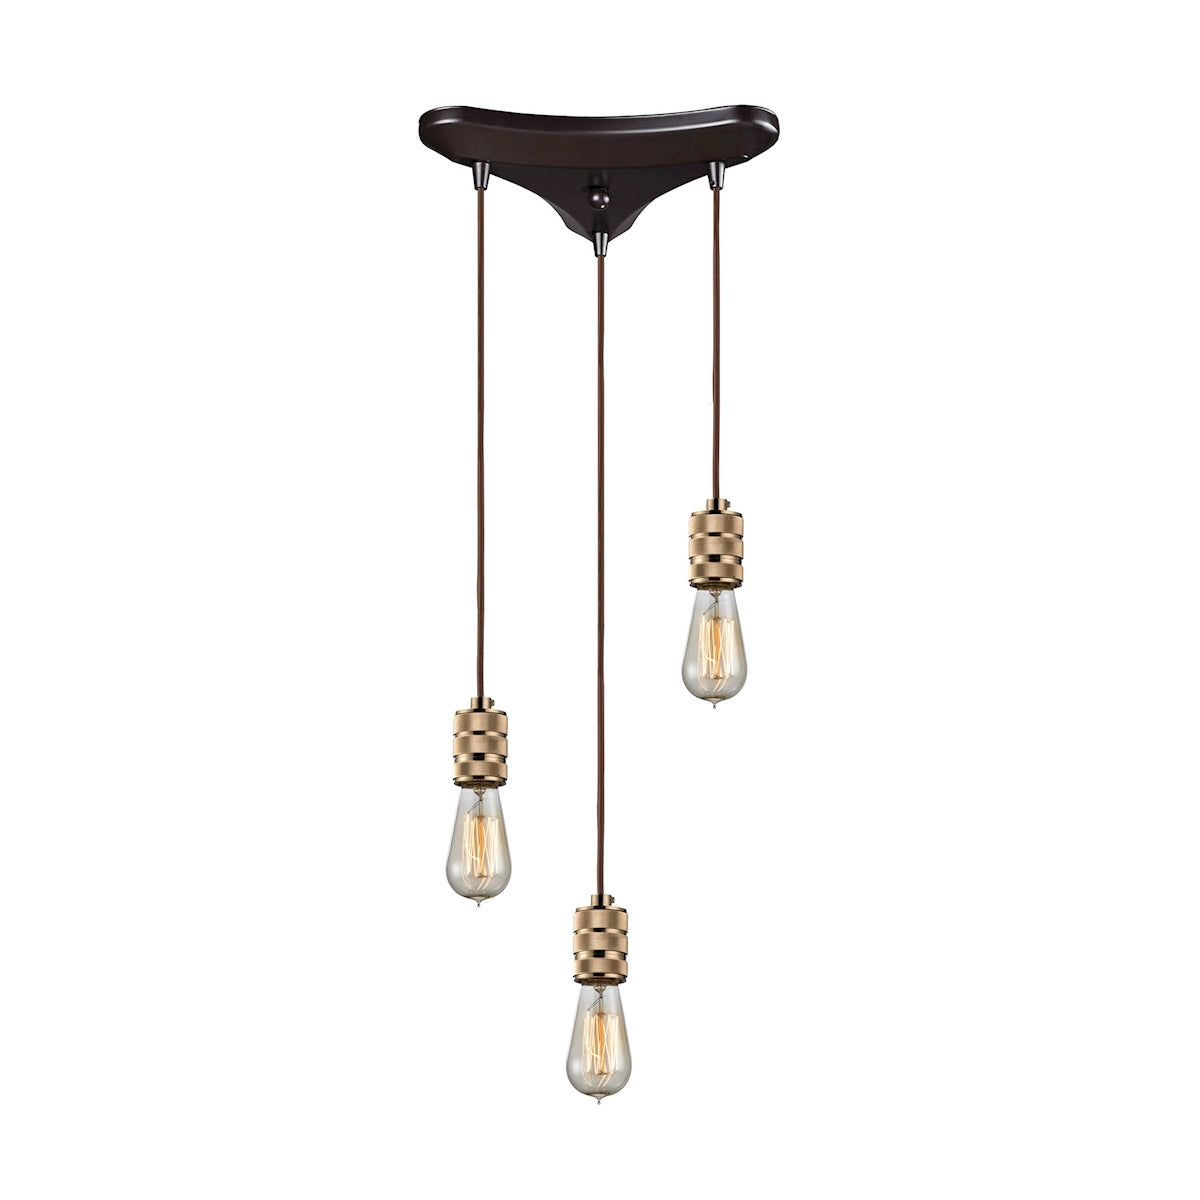 ELK Lighting 14391/3 - Camley 10" Wide 3-Light Triangular Pendant Fixture in Oil Rubbed Bronze and P